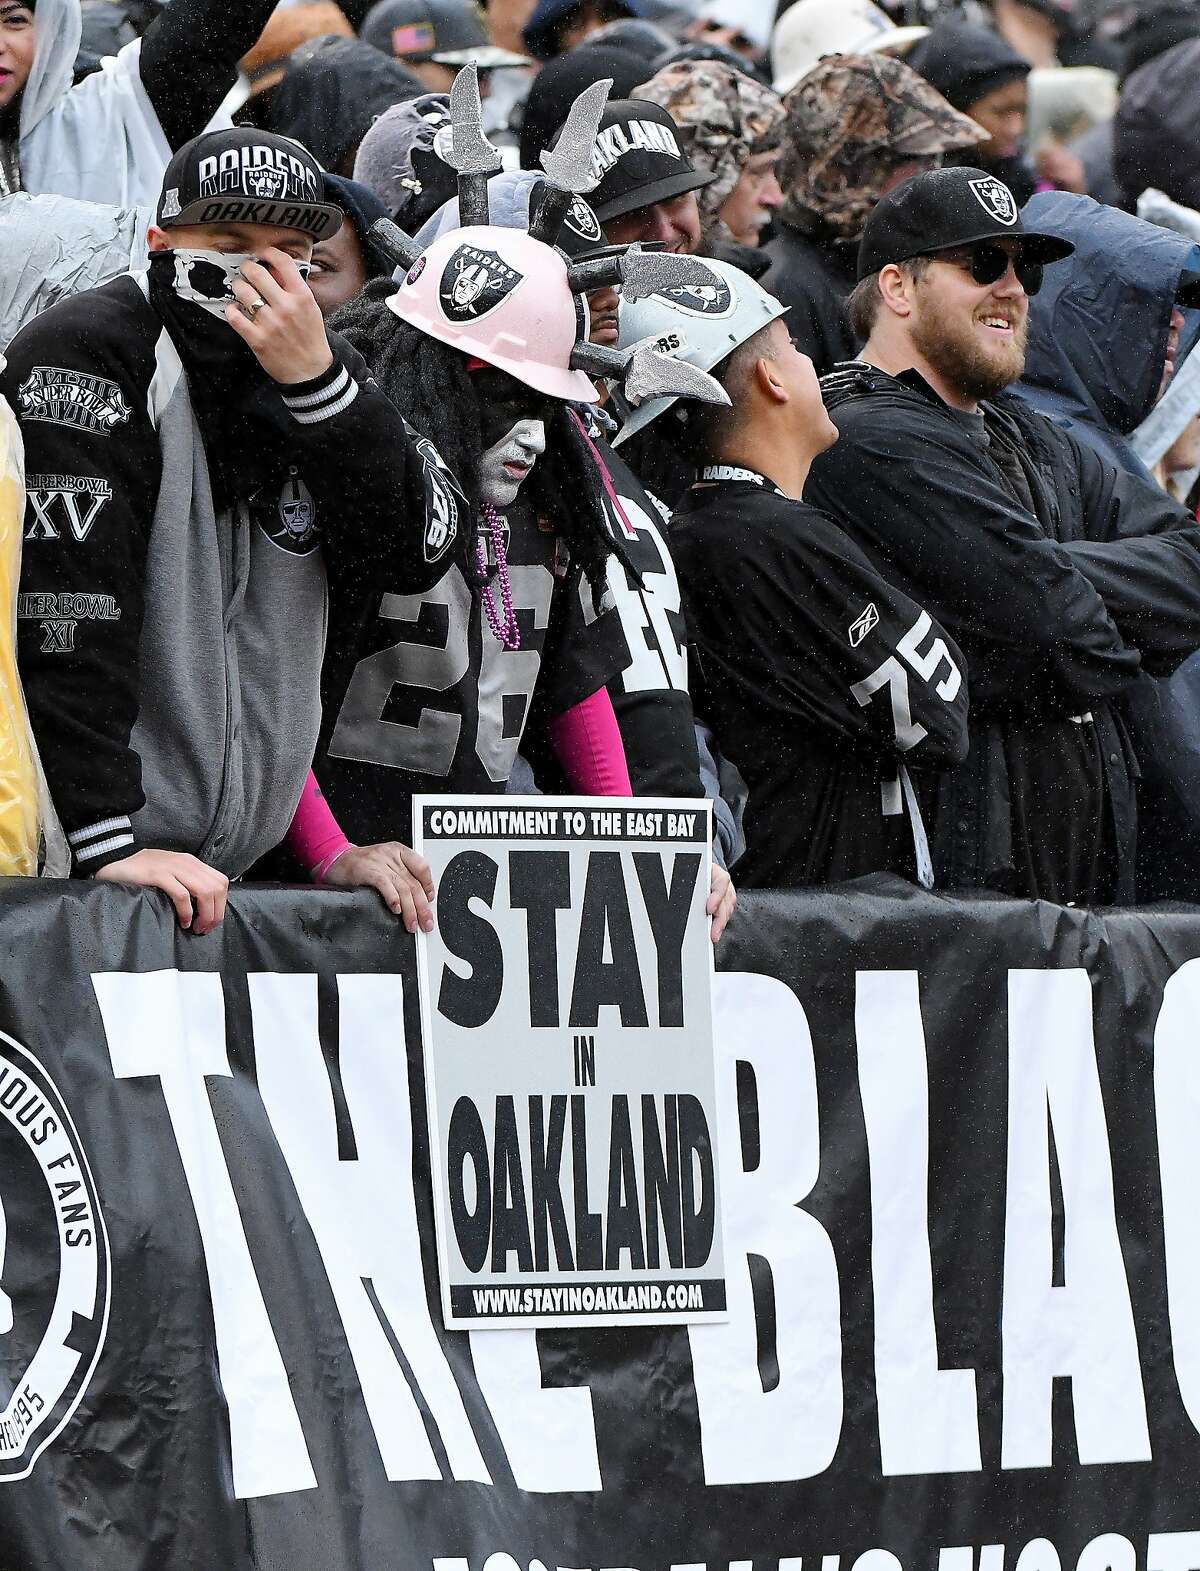 The Oakland Raiders Black Hole fan section in the fourth quarter during a game against the Kansas City Chiefs on Sunday, Oct. 16, 2016 at O.co Coliseum in Oakland, Calif. (John Sleezer/Kansas City Star/TNS)